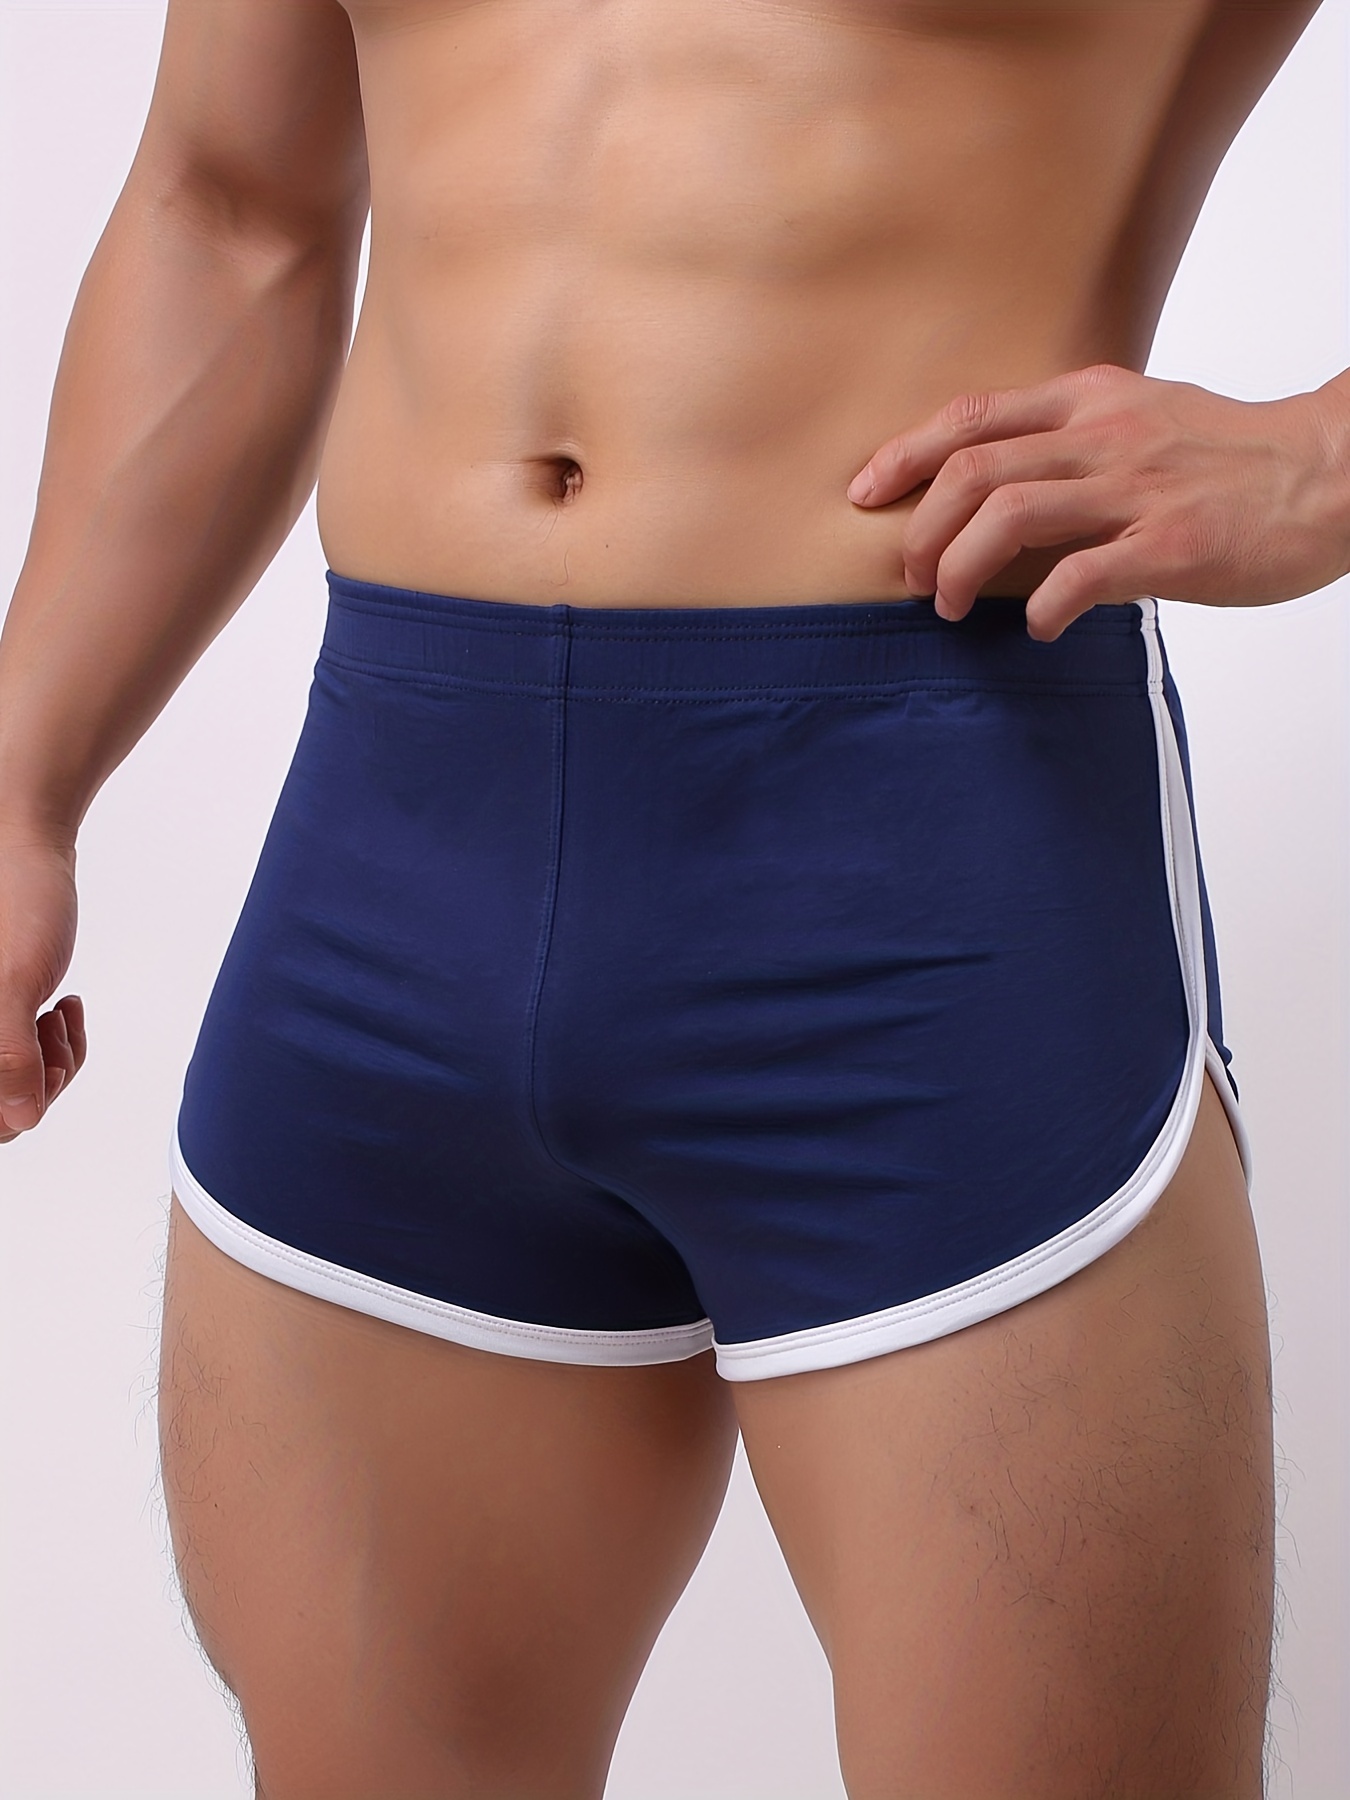 White Winter Short Oversized Athletic Running Underwear Men's Sexy Out  Tight Pants Are Breathable Boxers Buttock Movement 